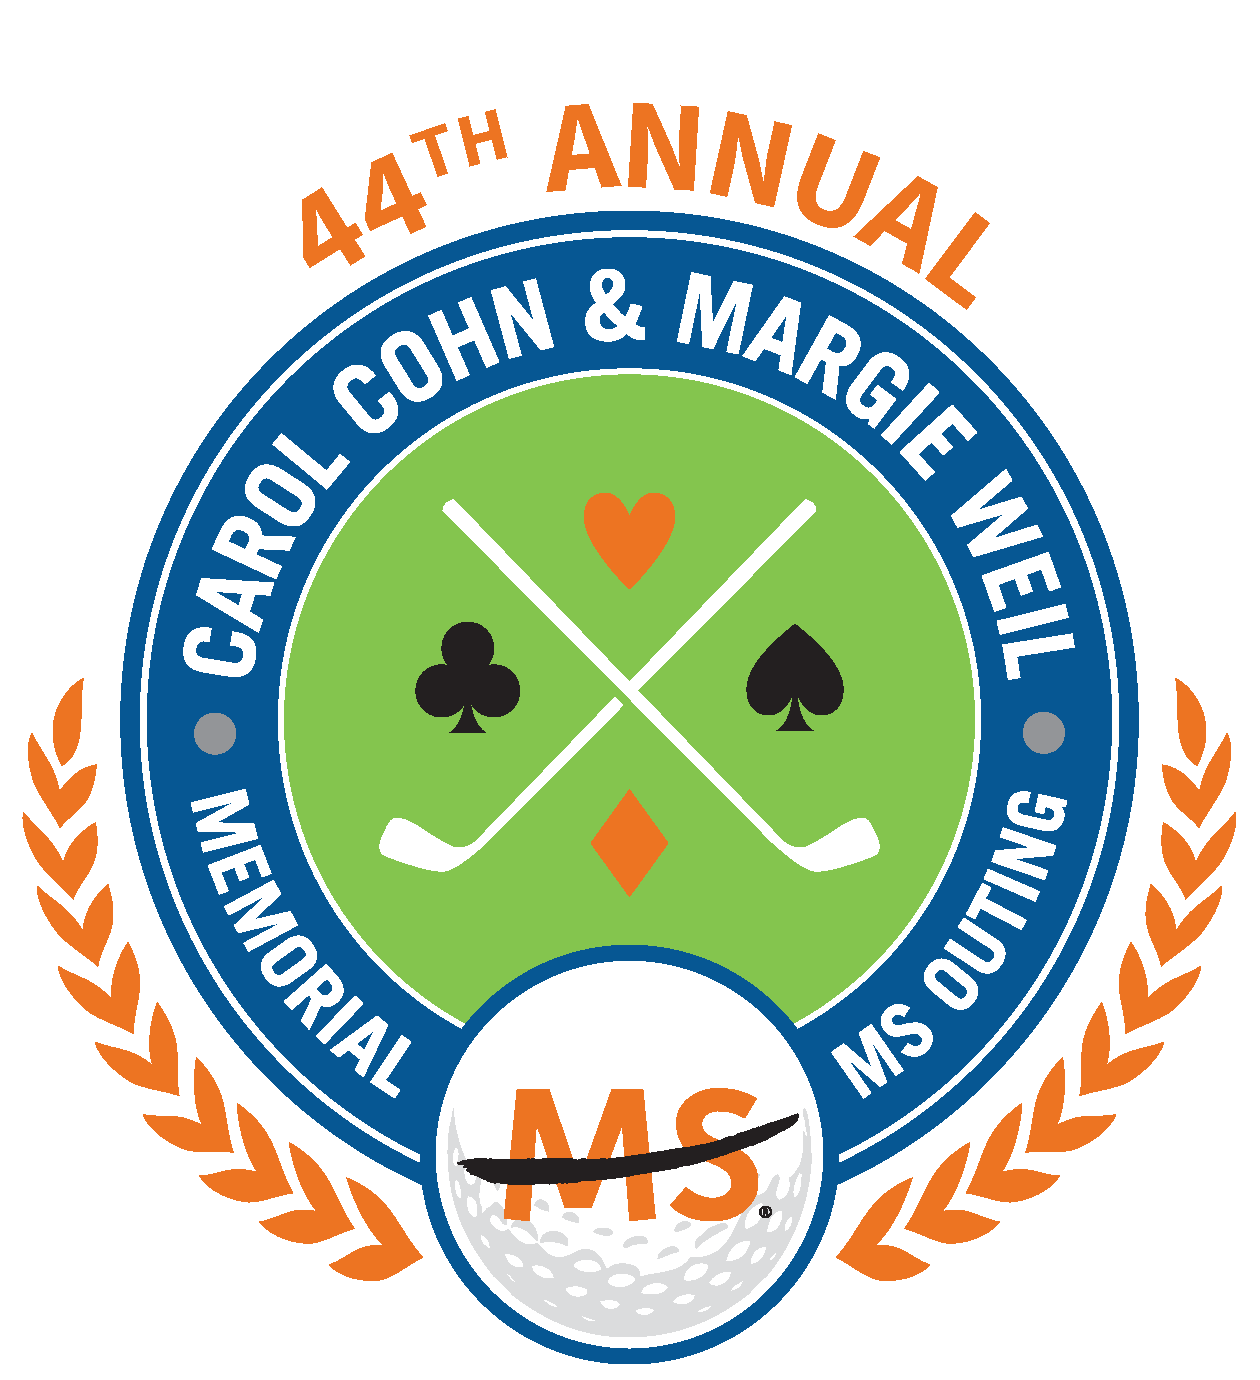 44th Annual Carol Cohn and Margie Weil Memorial MS Outing